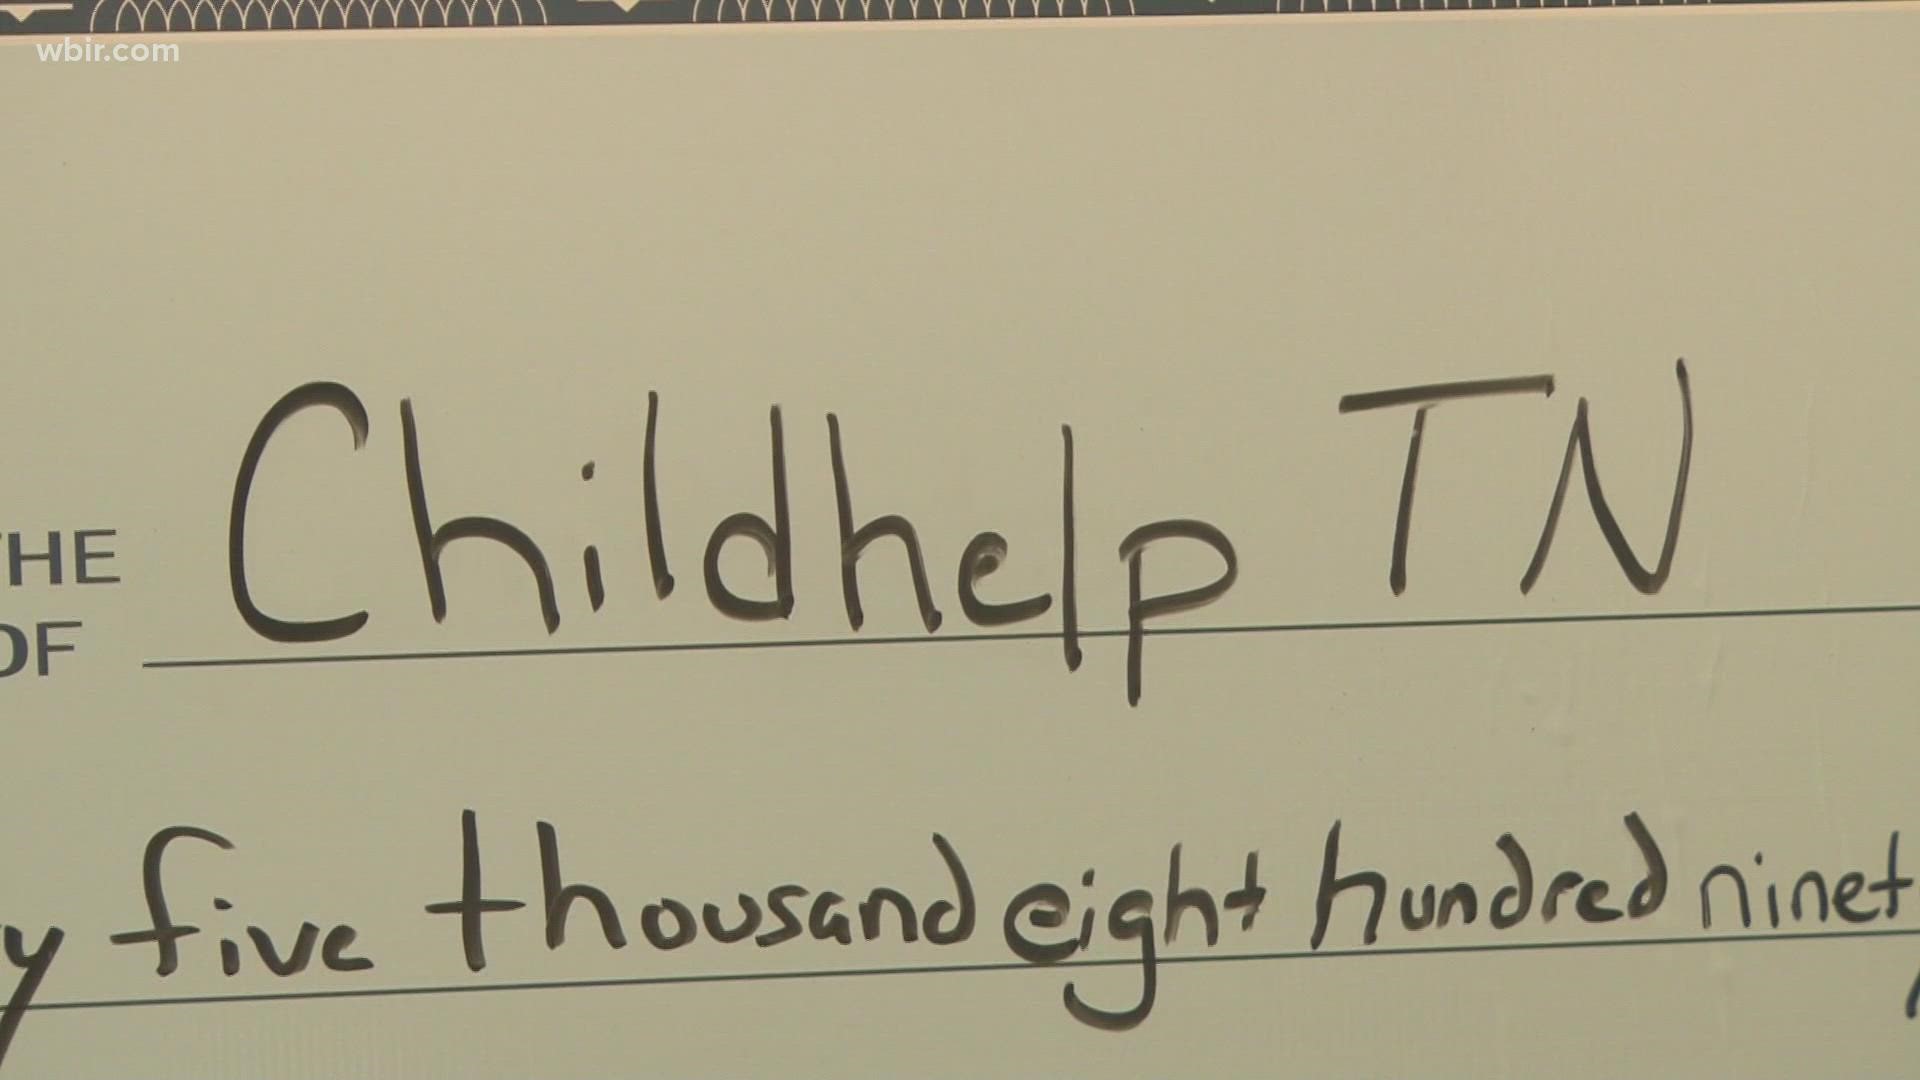 UT's Kappa Delta chapter has donated $35,000 to Child Help, an organization that provides mental health assistance to children.